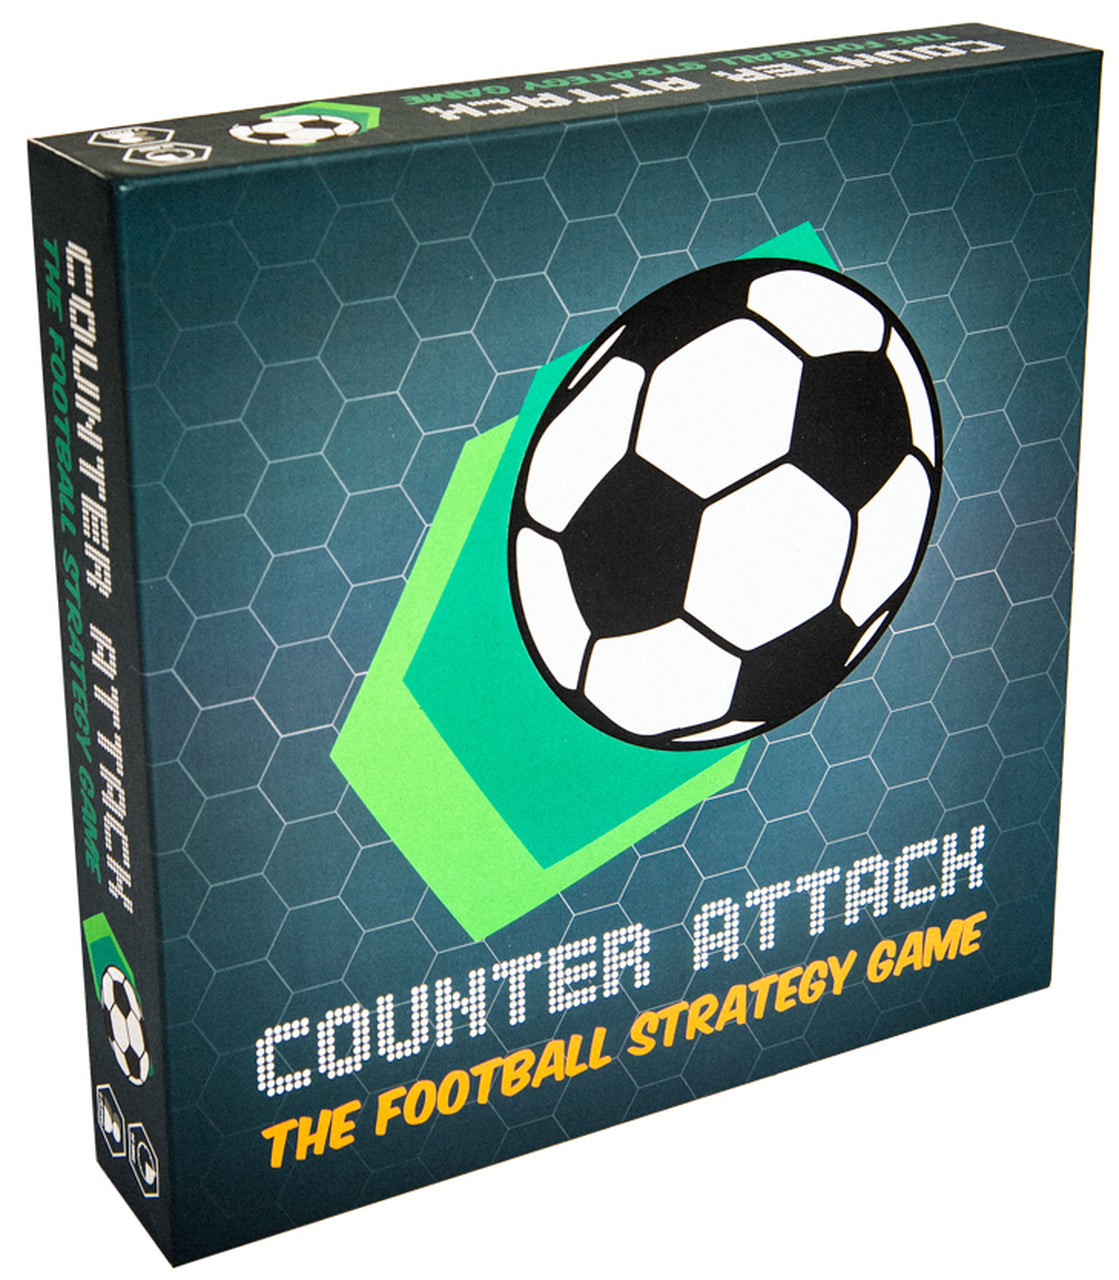 Counter Attack - A matchday simulation that captures the thrills of football!